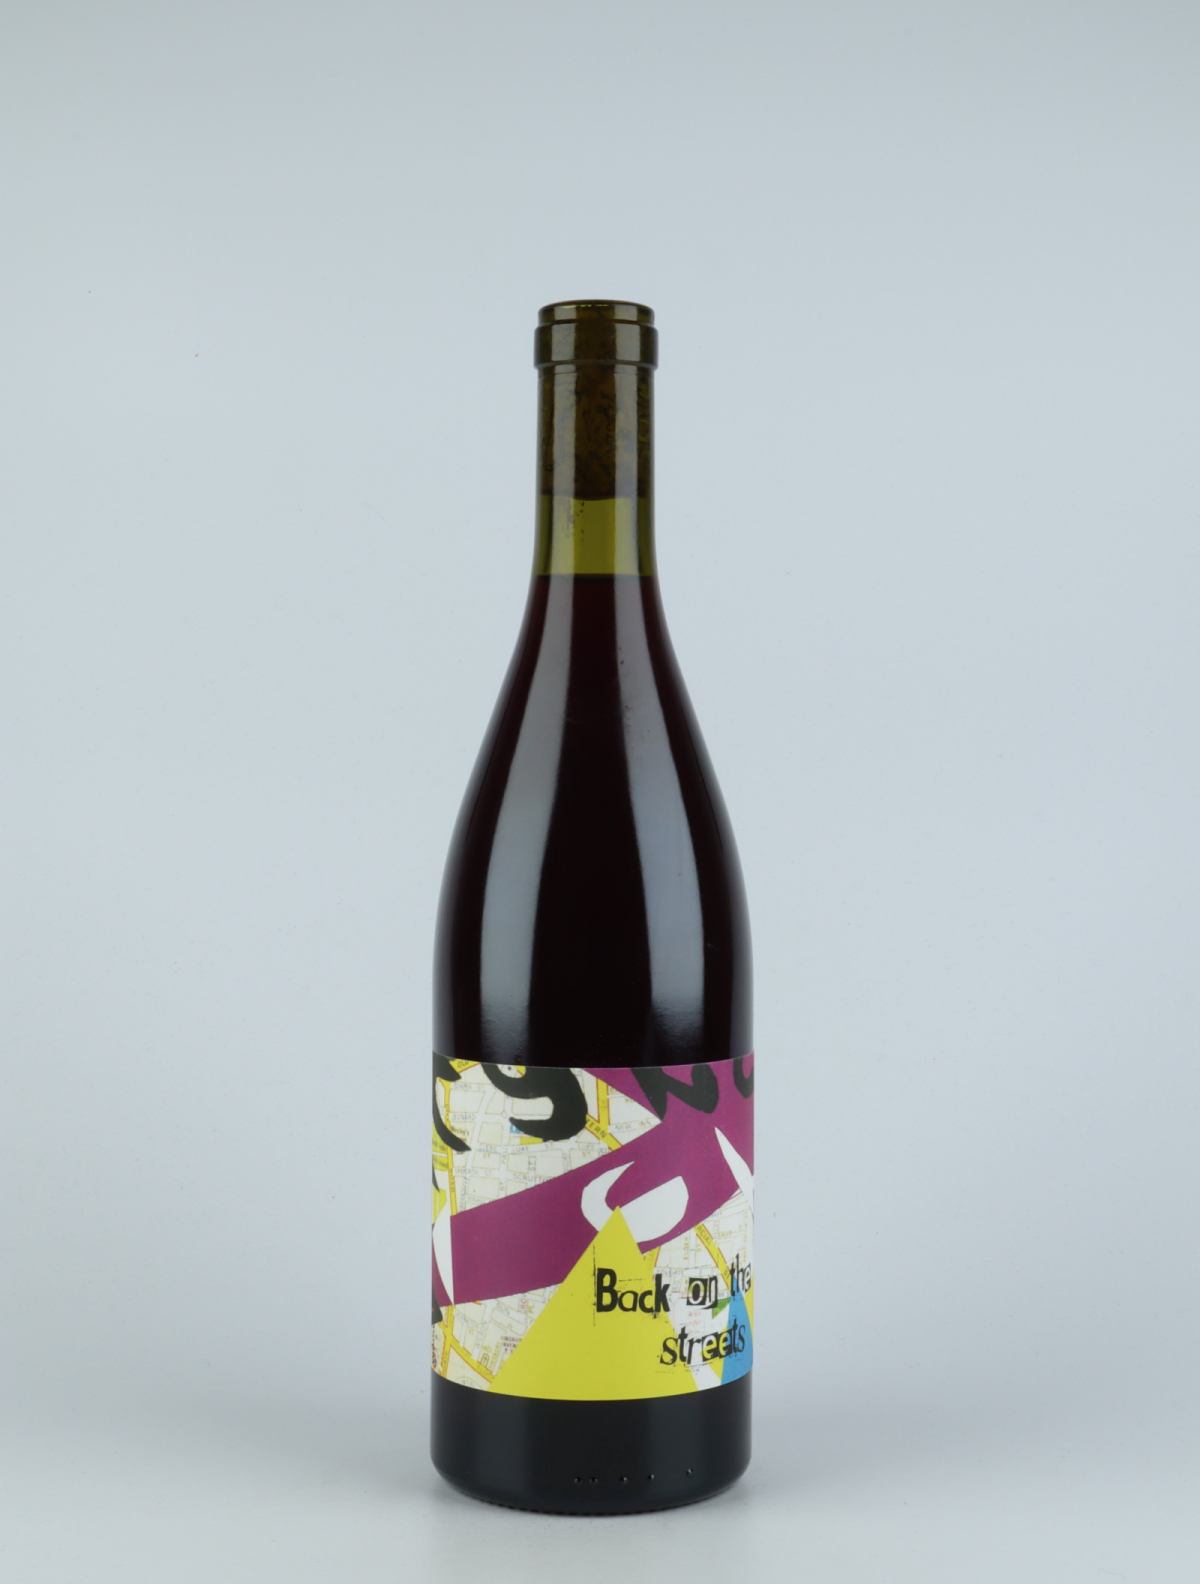 A bottle 2018 Back on the streets Red wine from Ad Vinum, Gard in France